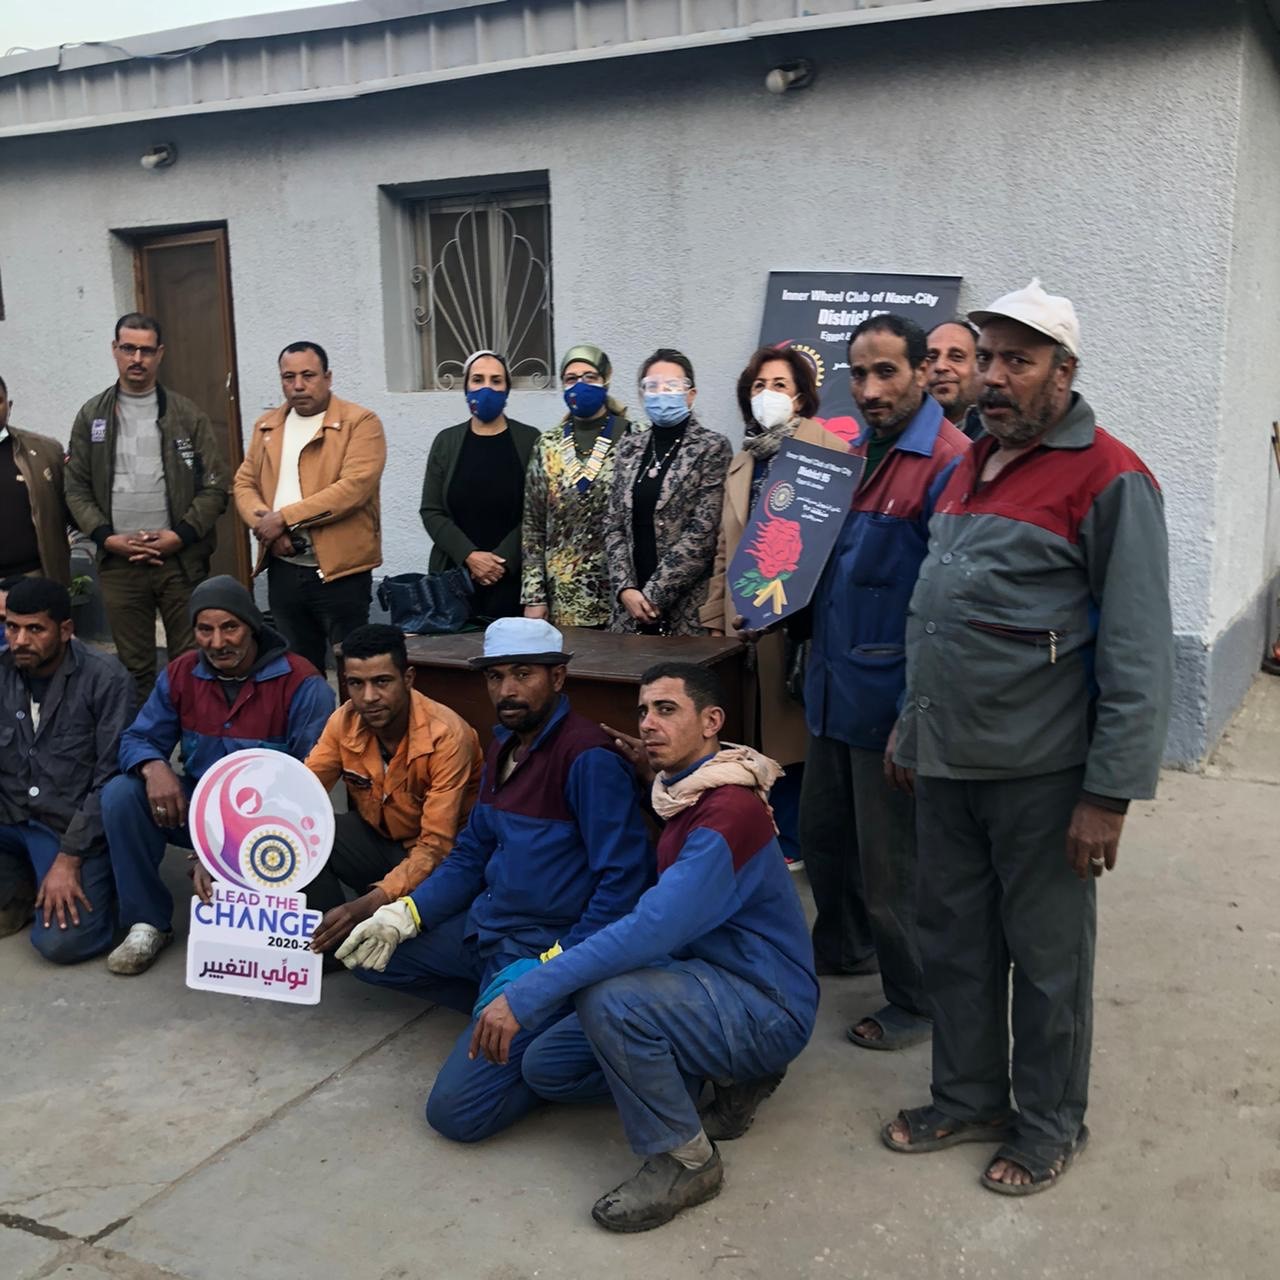 5-The Sanitation workers& the members of IWC of Nasr City